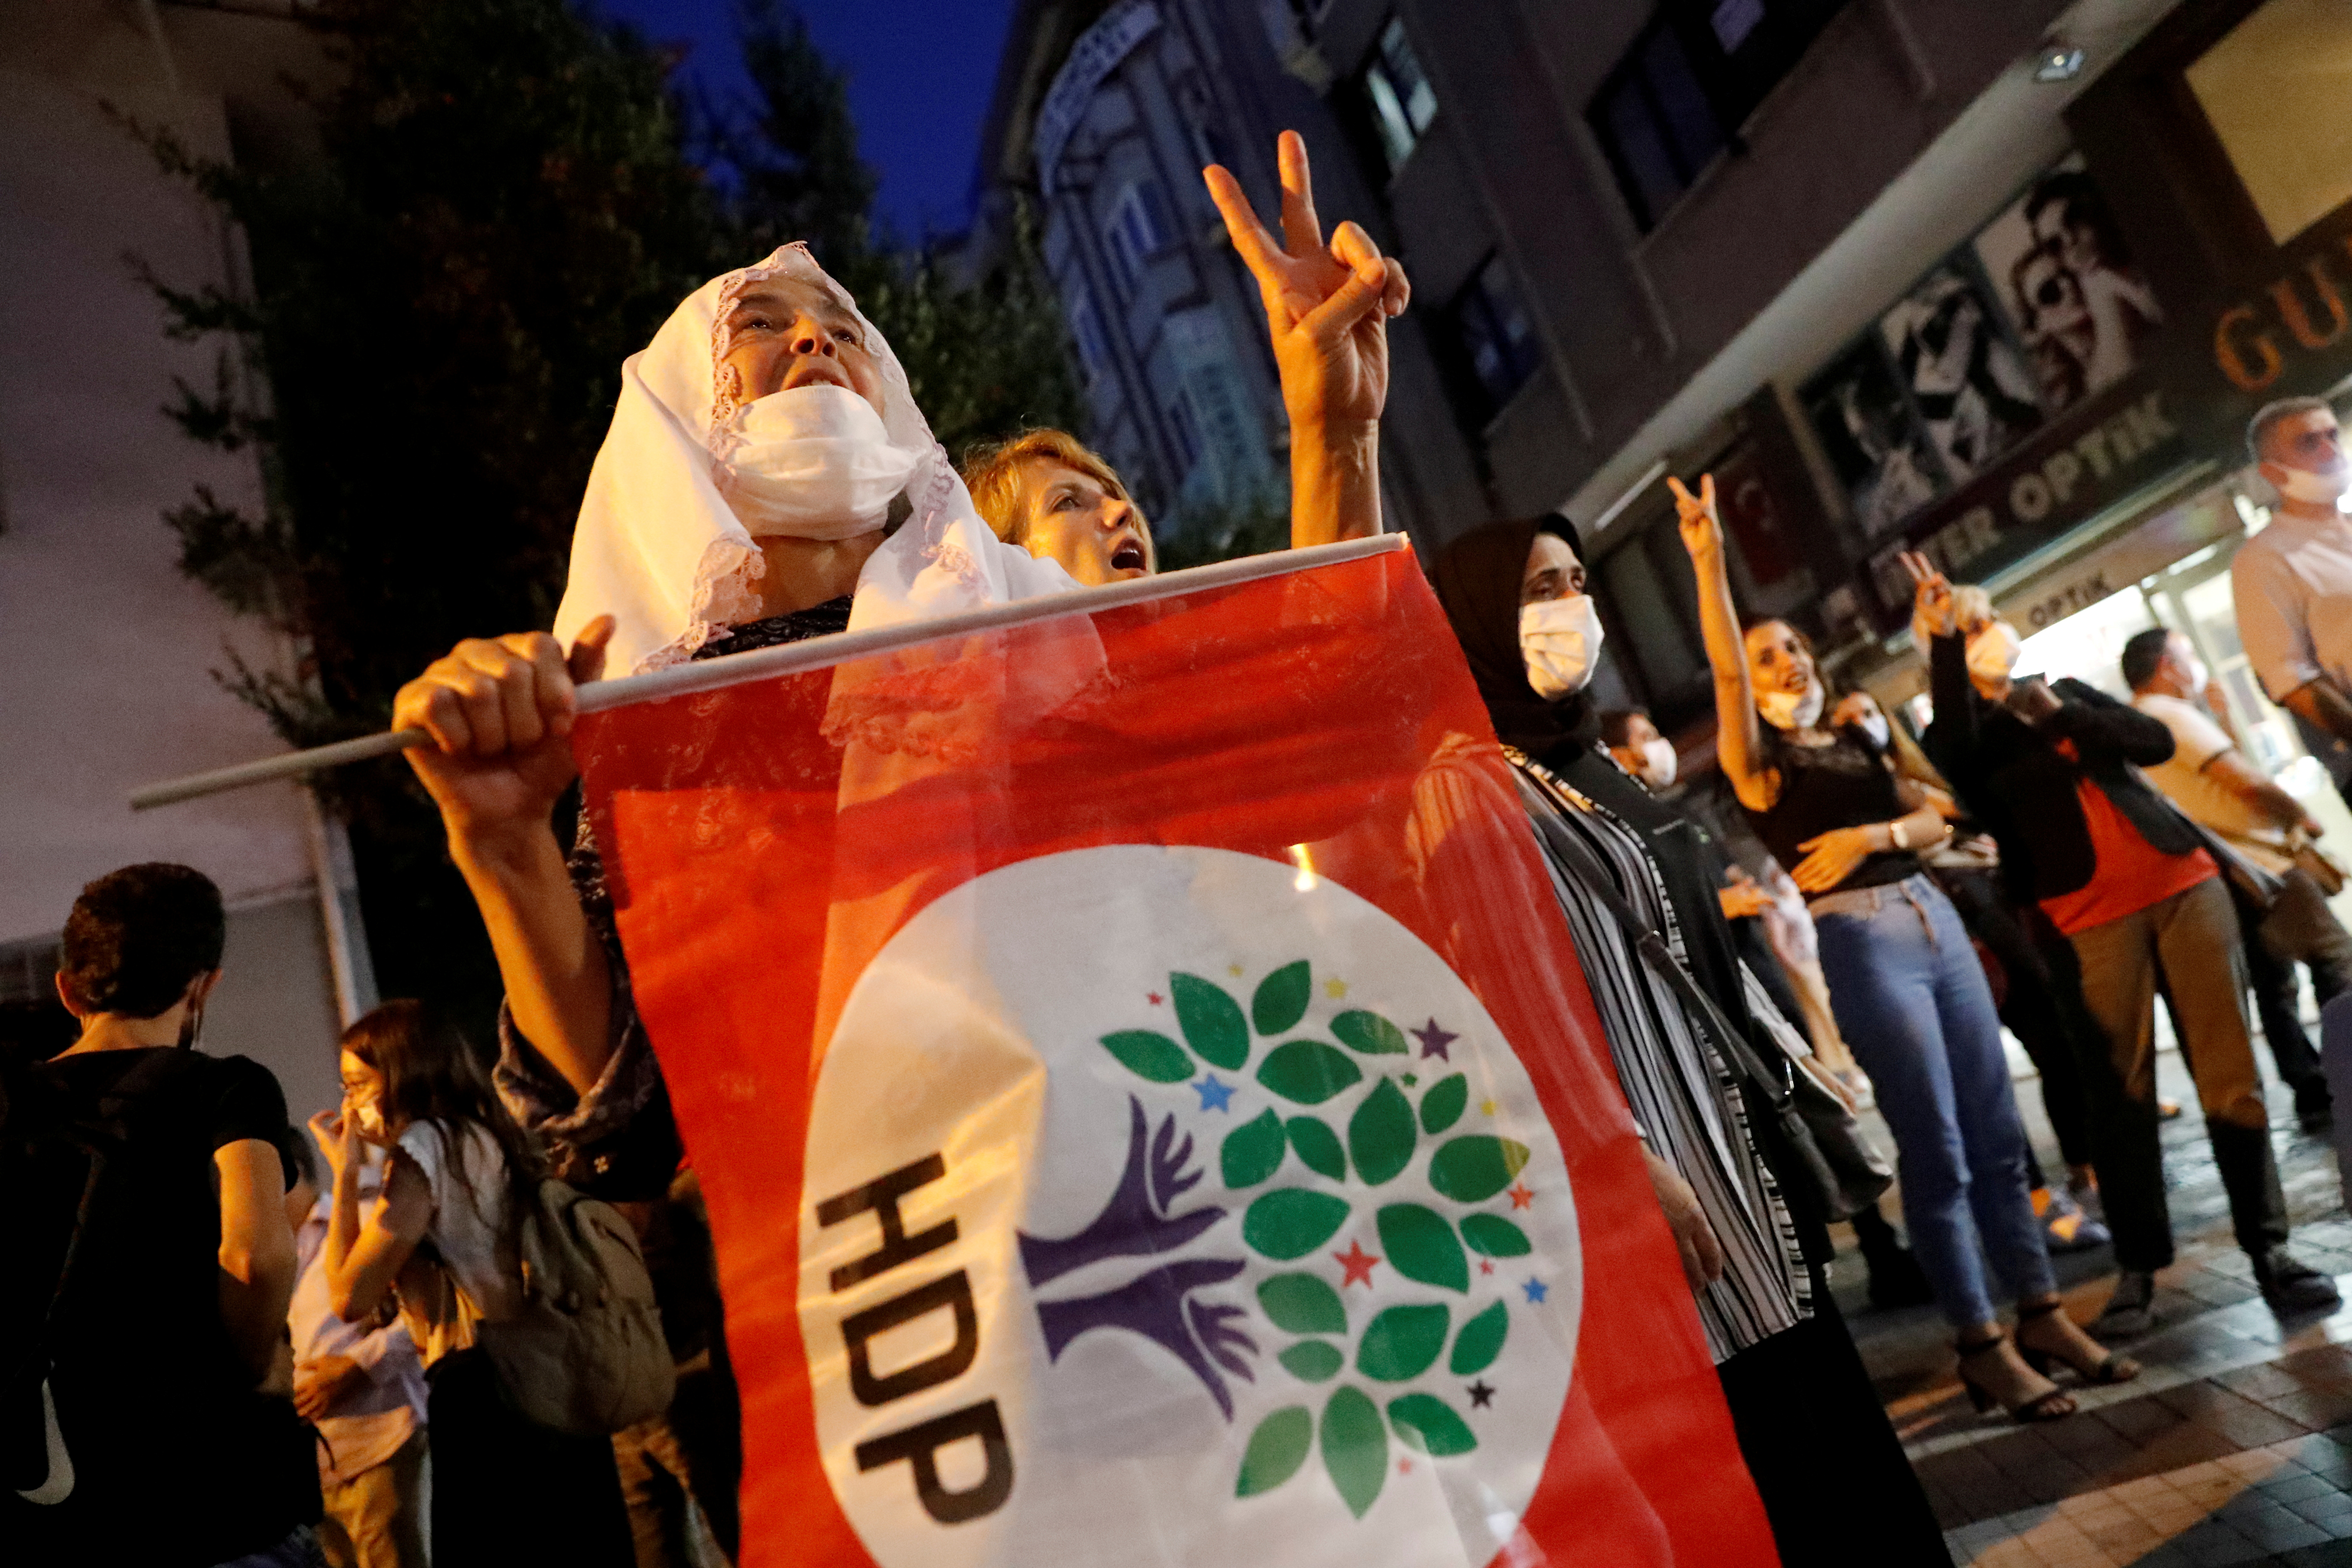 Supporters of pro-Kurdish Peoples Democratic Party (HDP) shout slogans during a protest against the arrest of 82 people including members of their party, in Istanbul, Turkey September 25, 2020. REUTERS/Murad Sezer/File Photo